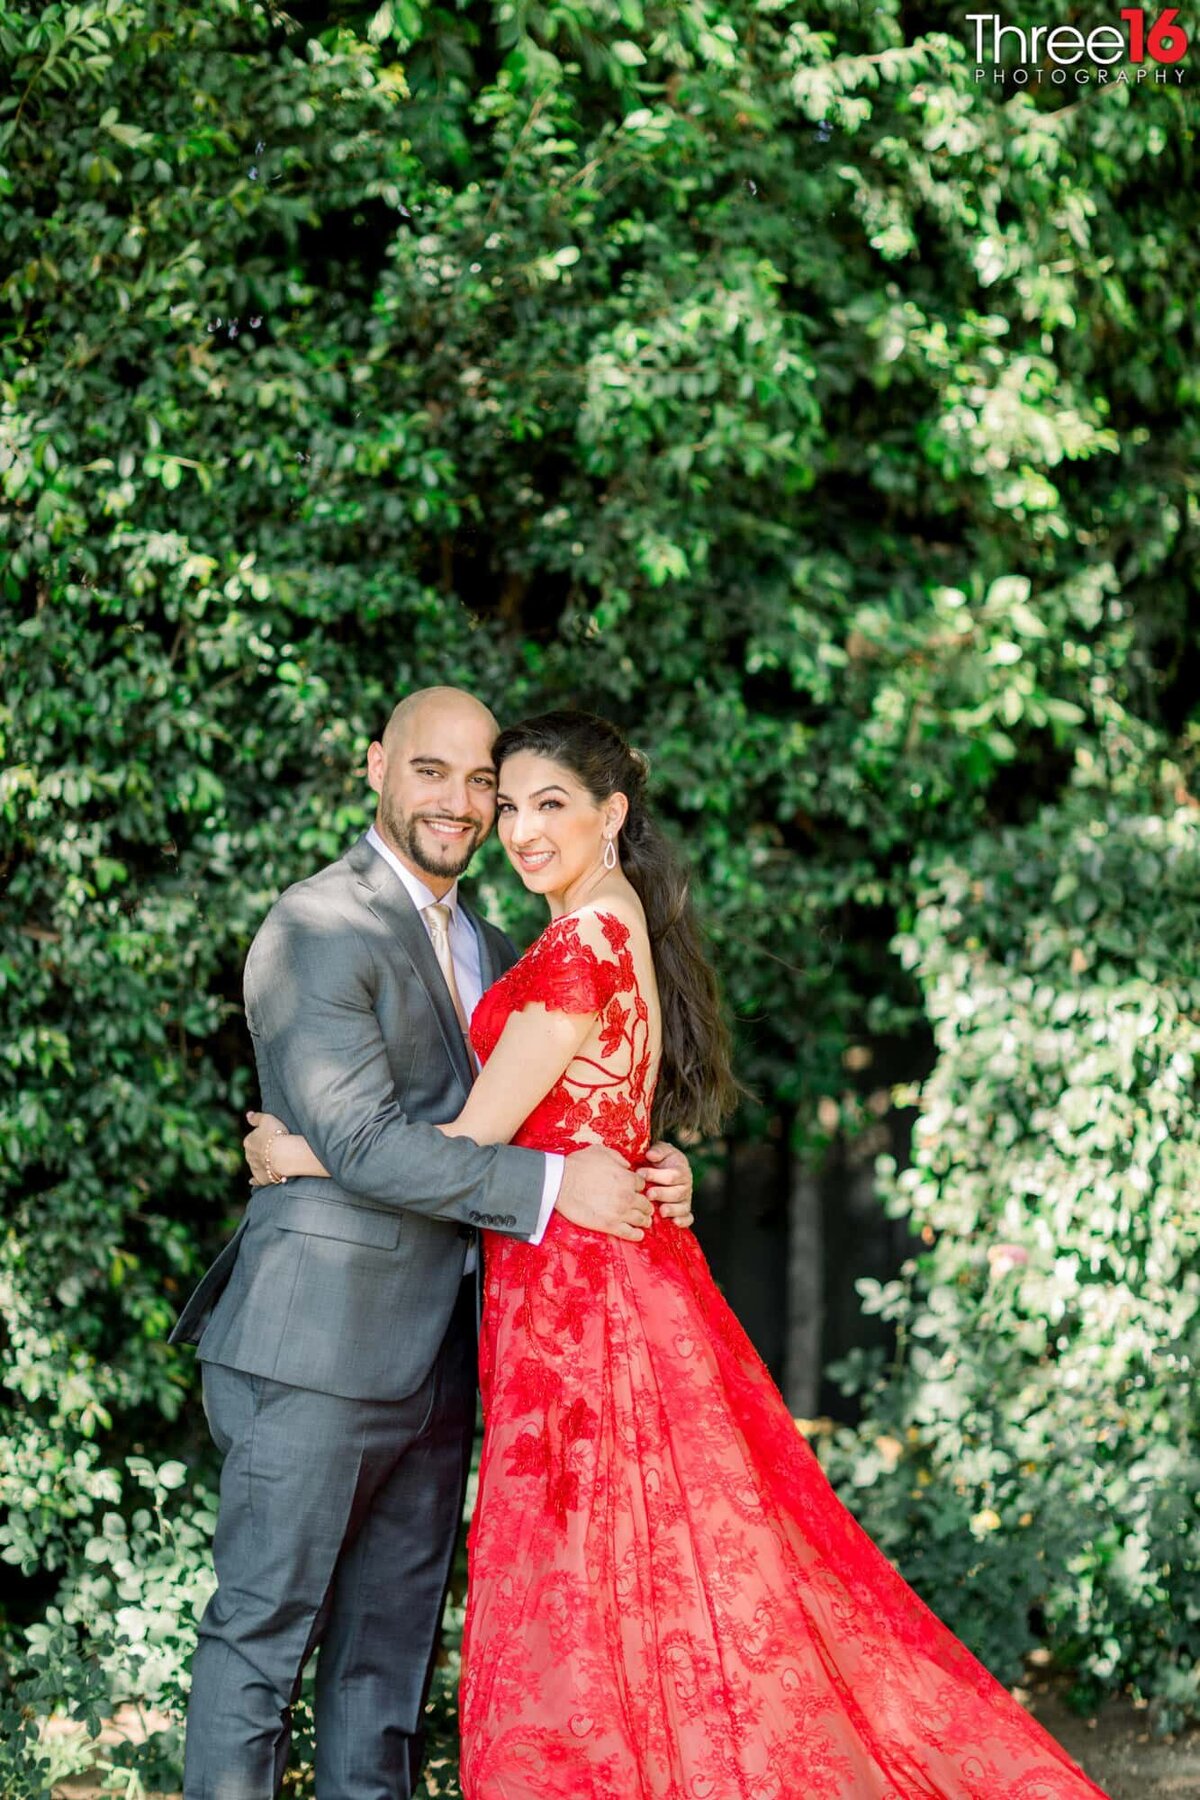 Bride to be dons a beautiful red dress as she embraces her Groom